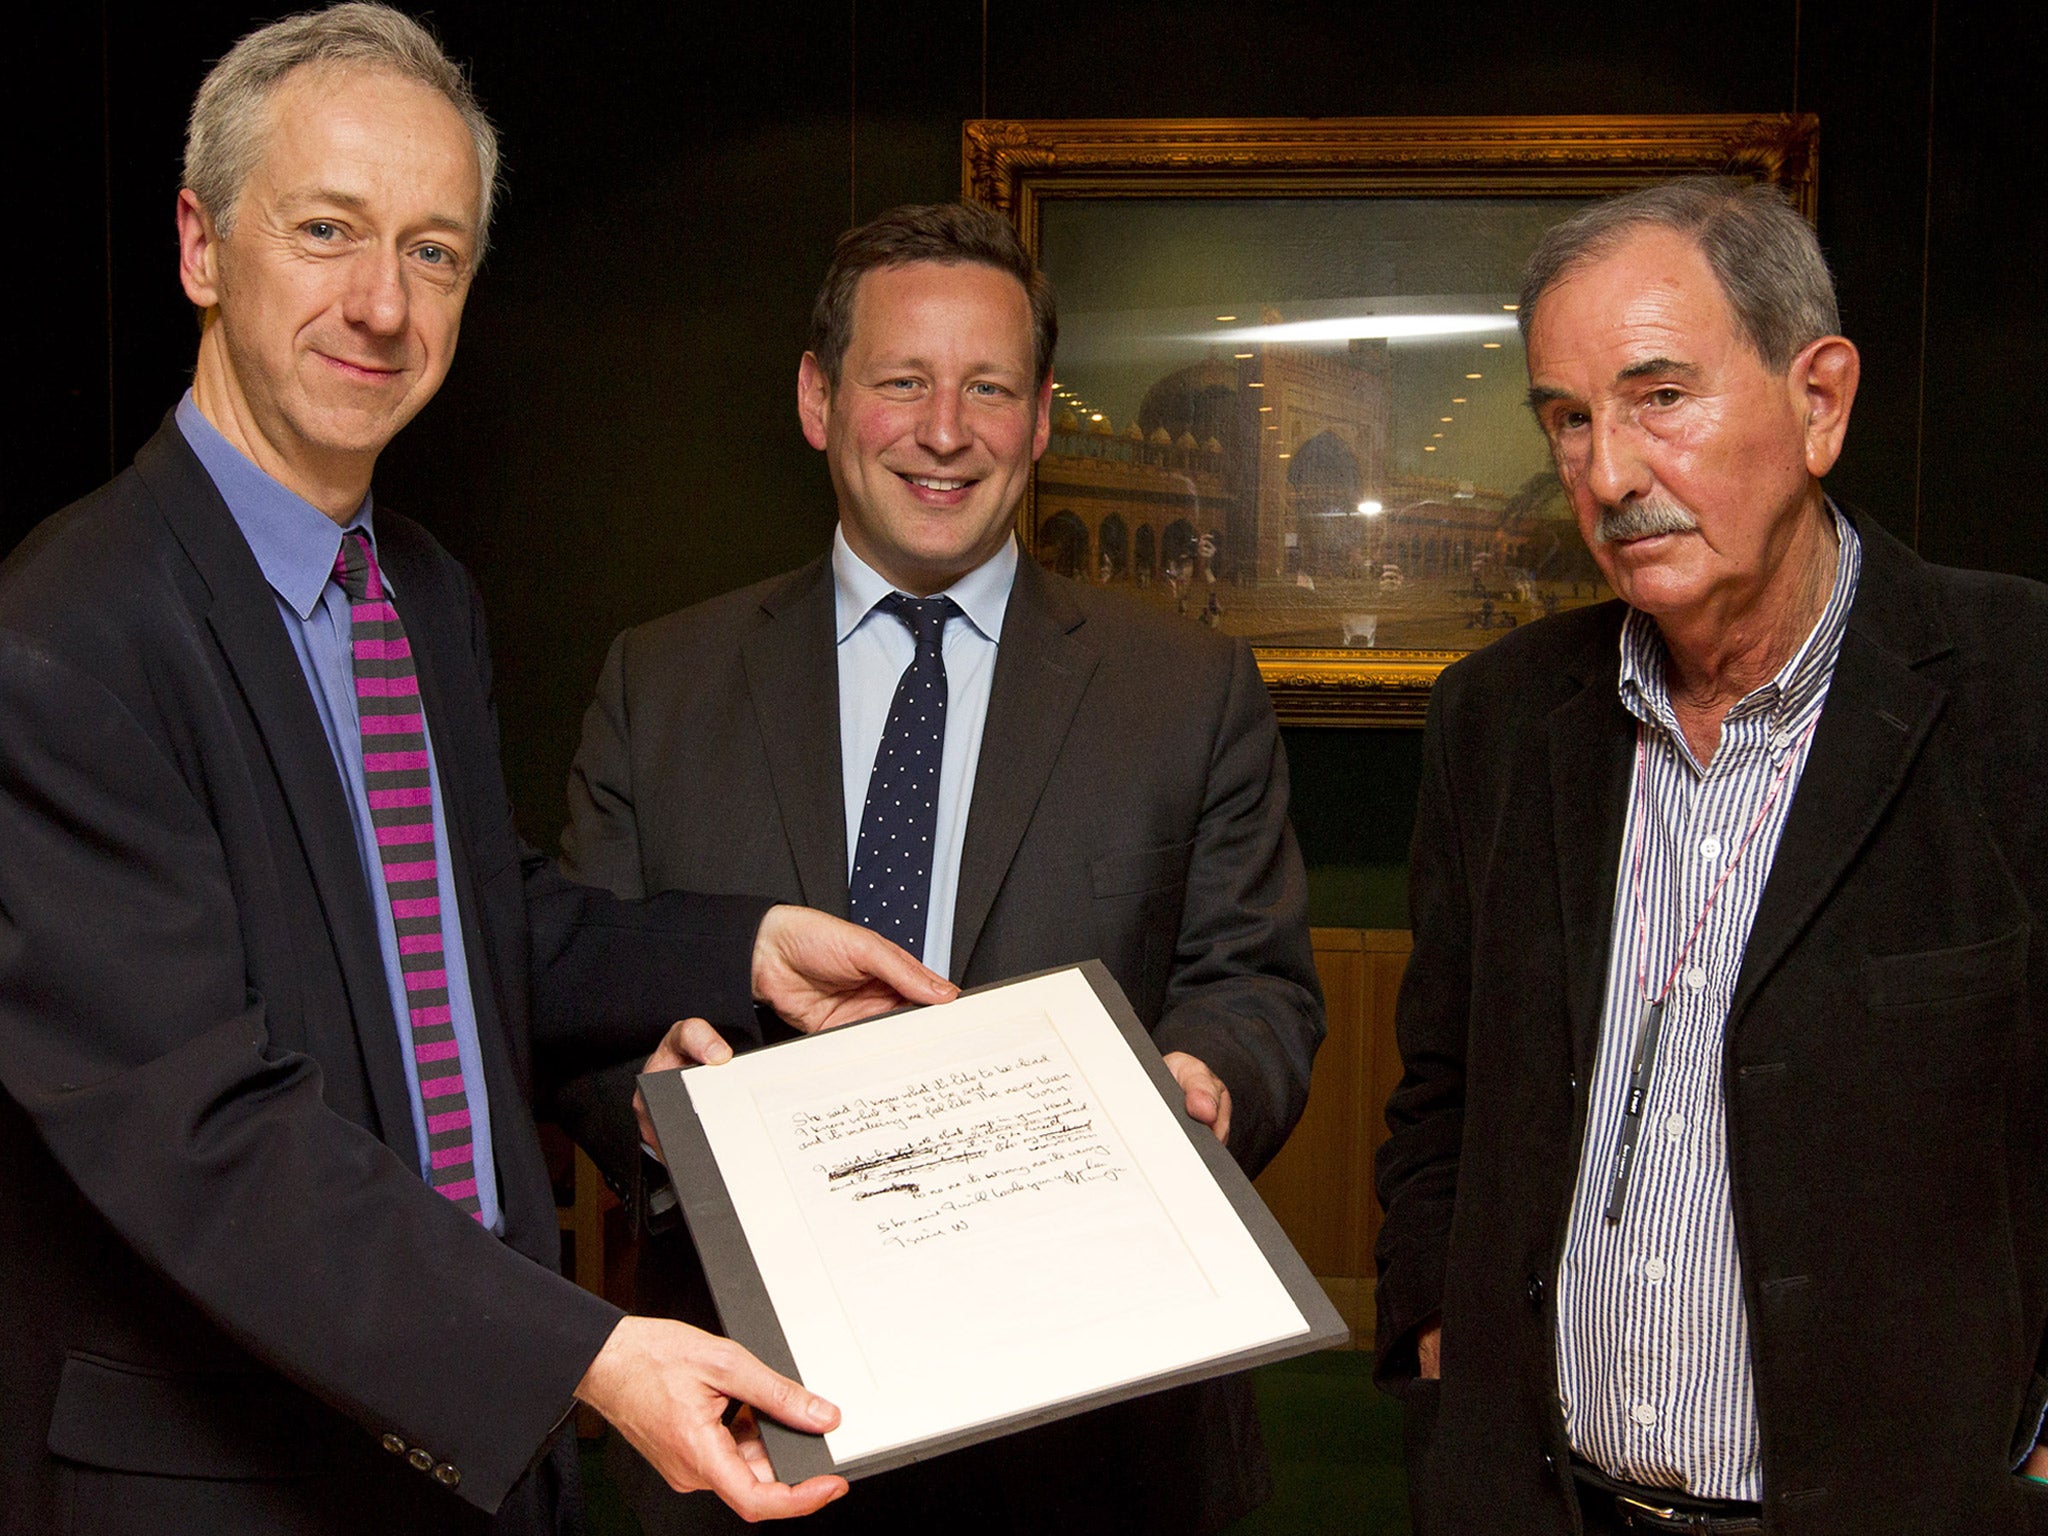 Roly Keating, the chief executive of the British Library, Ed Vaizey, the British Minister for Culture and Hunter Davies, acclaimed Beatles biographer, with the lyrics for the Beatles song 'She Said She Said'